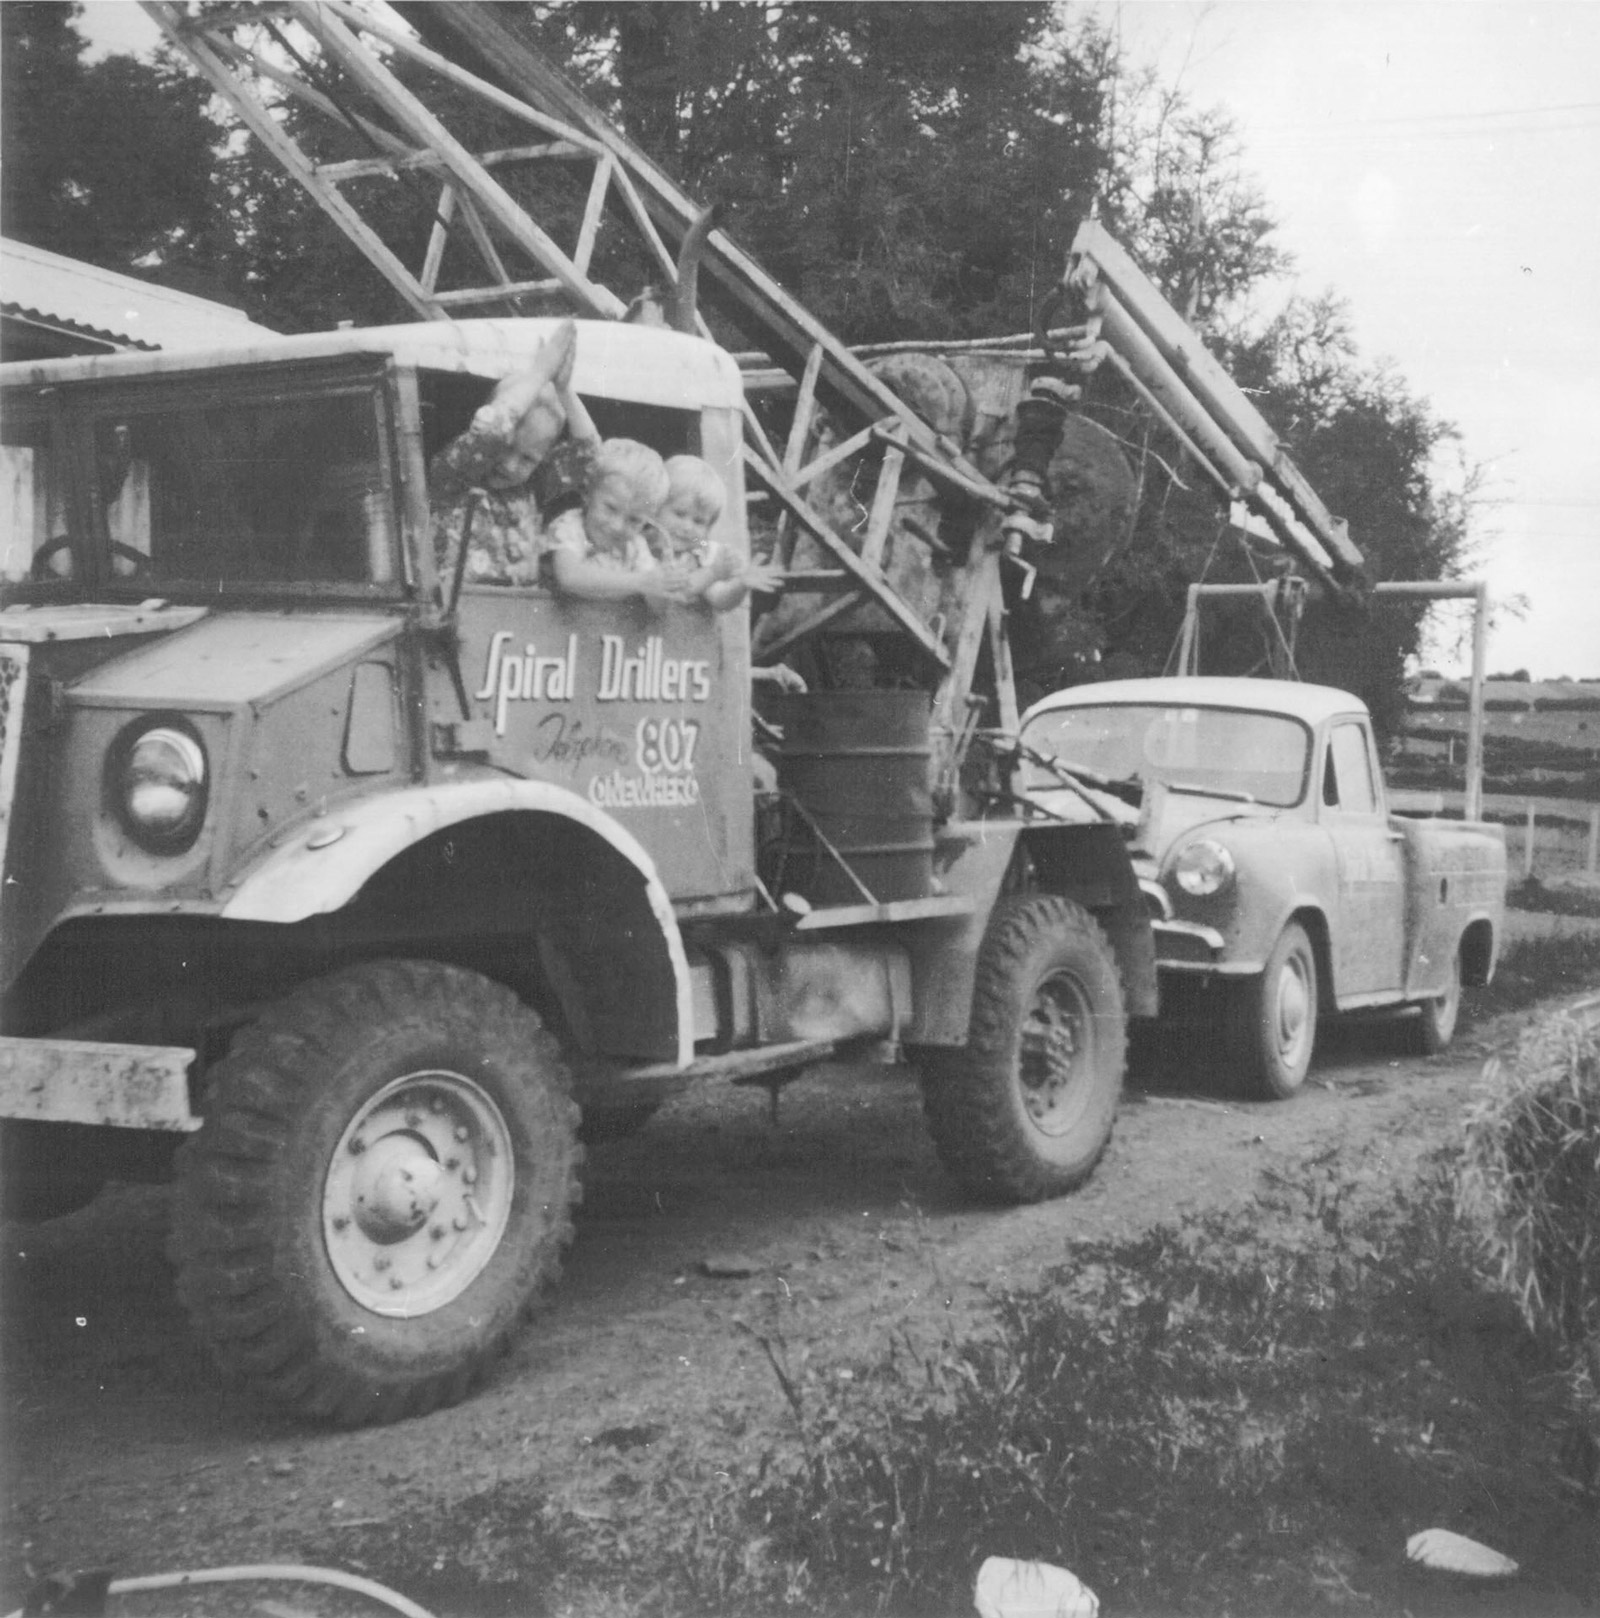 Spiral Drillers Vehicles in the 1970s